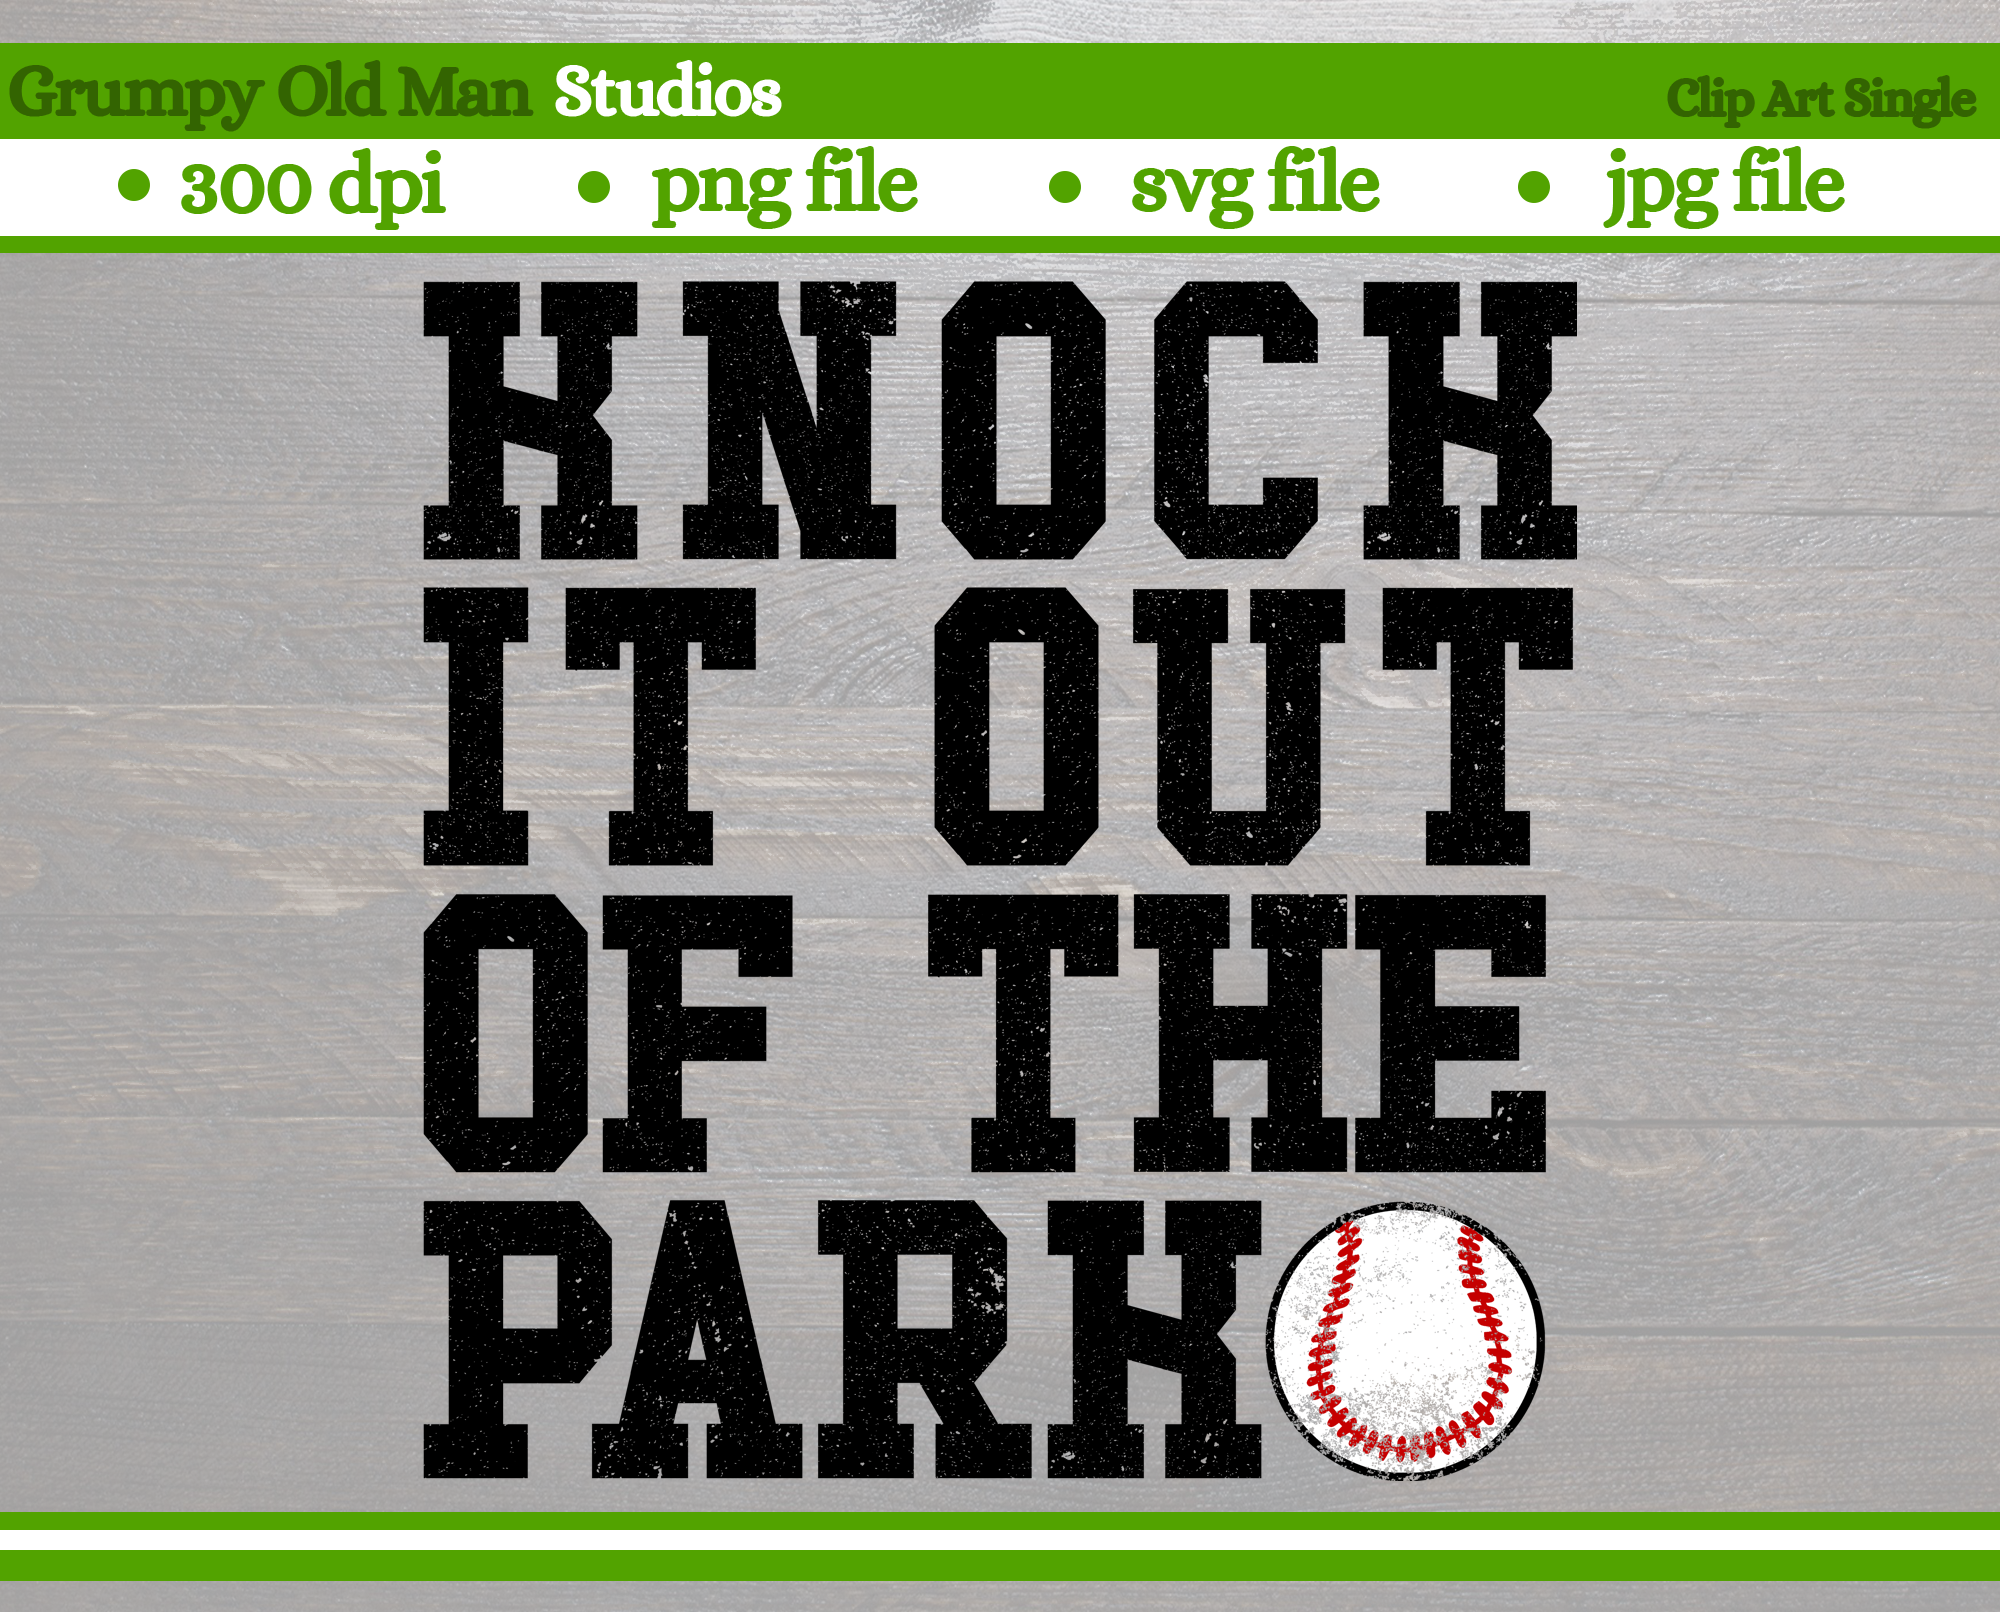 Knock it out park baseball field Royalty Free Vector Image